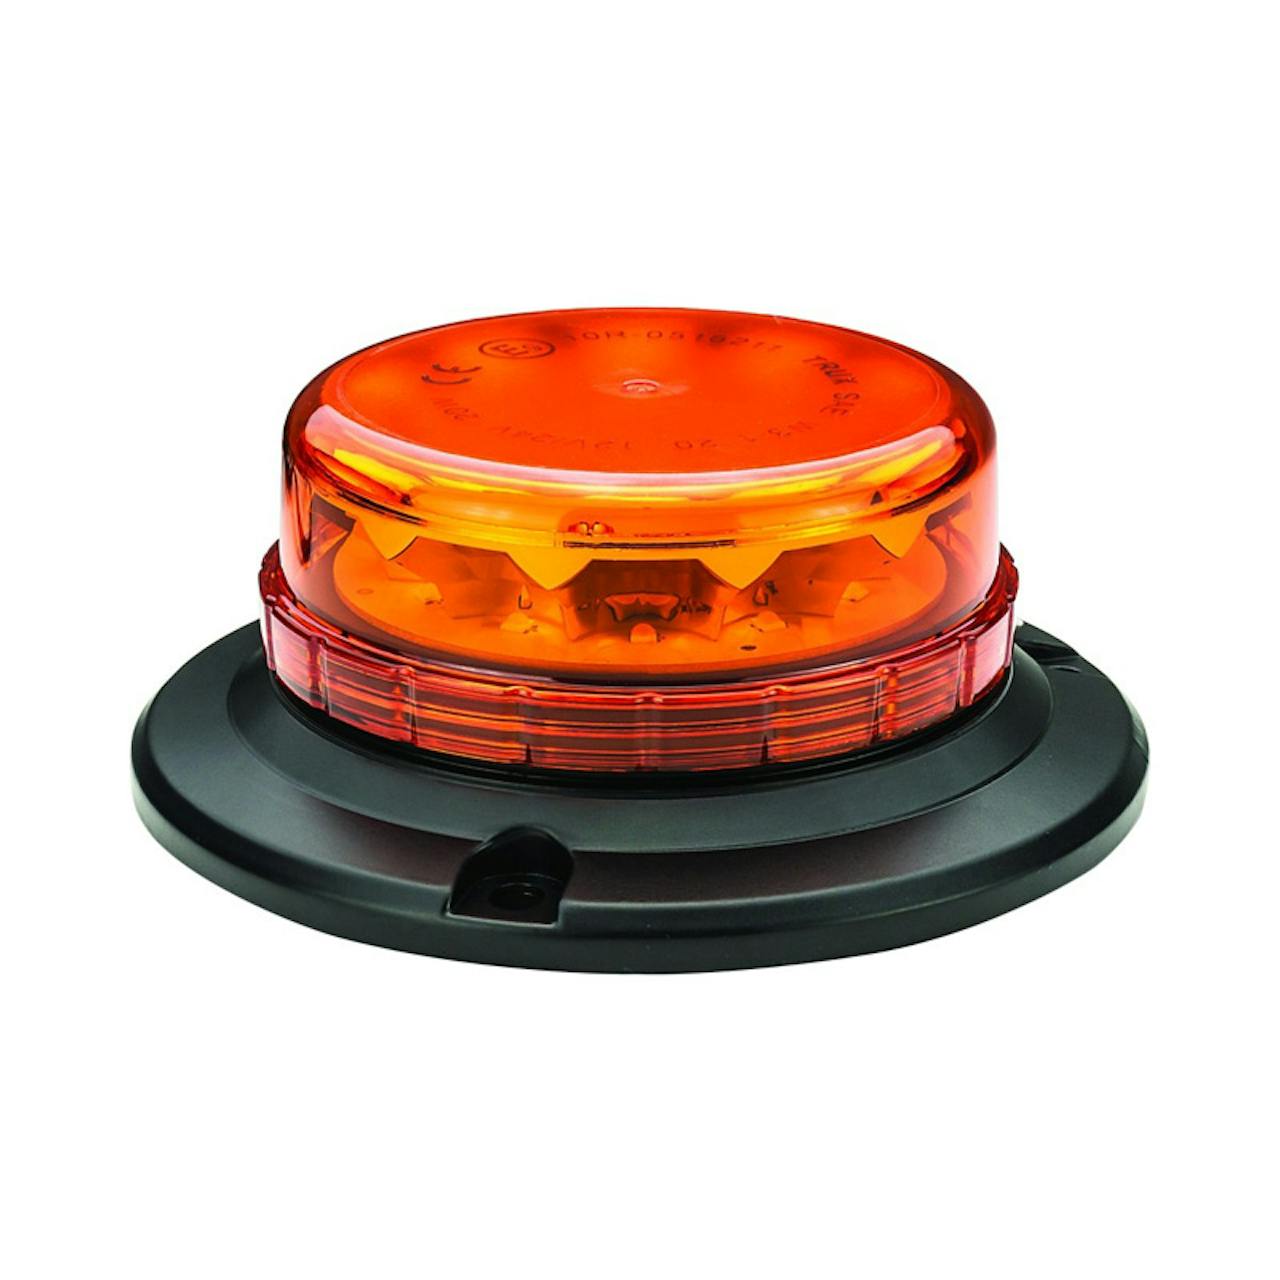 Class 1 Beacon Low Profile LED Warning Light - Raney's Truck Parts